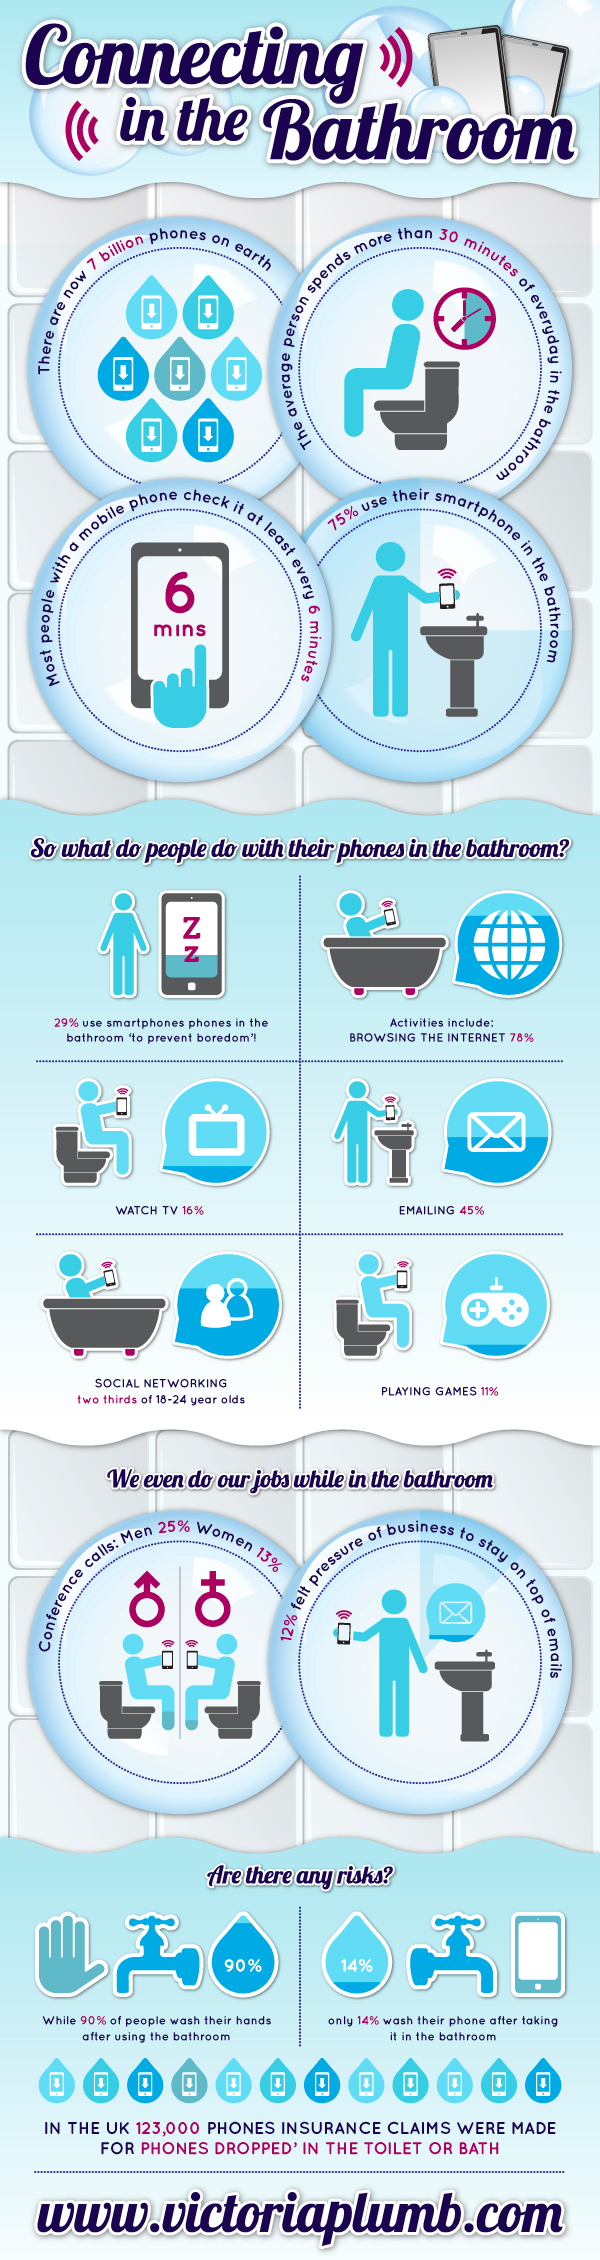 How-People-Use-Their-Phone